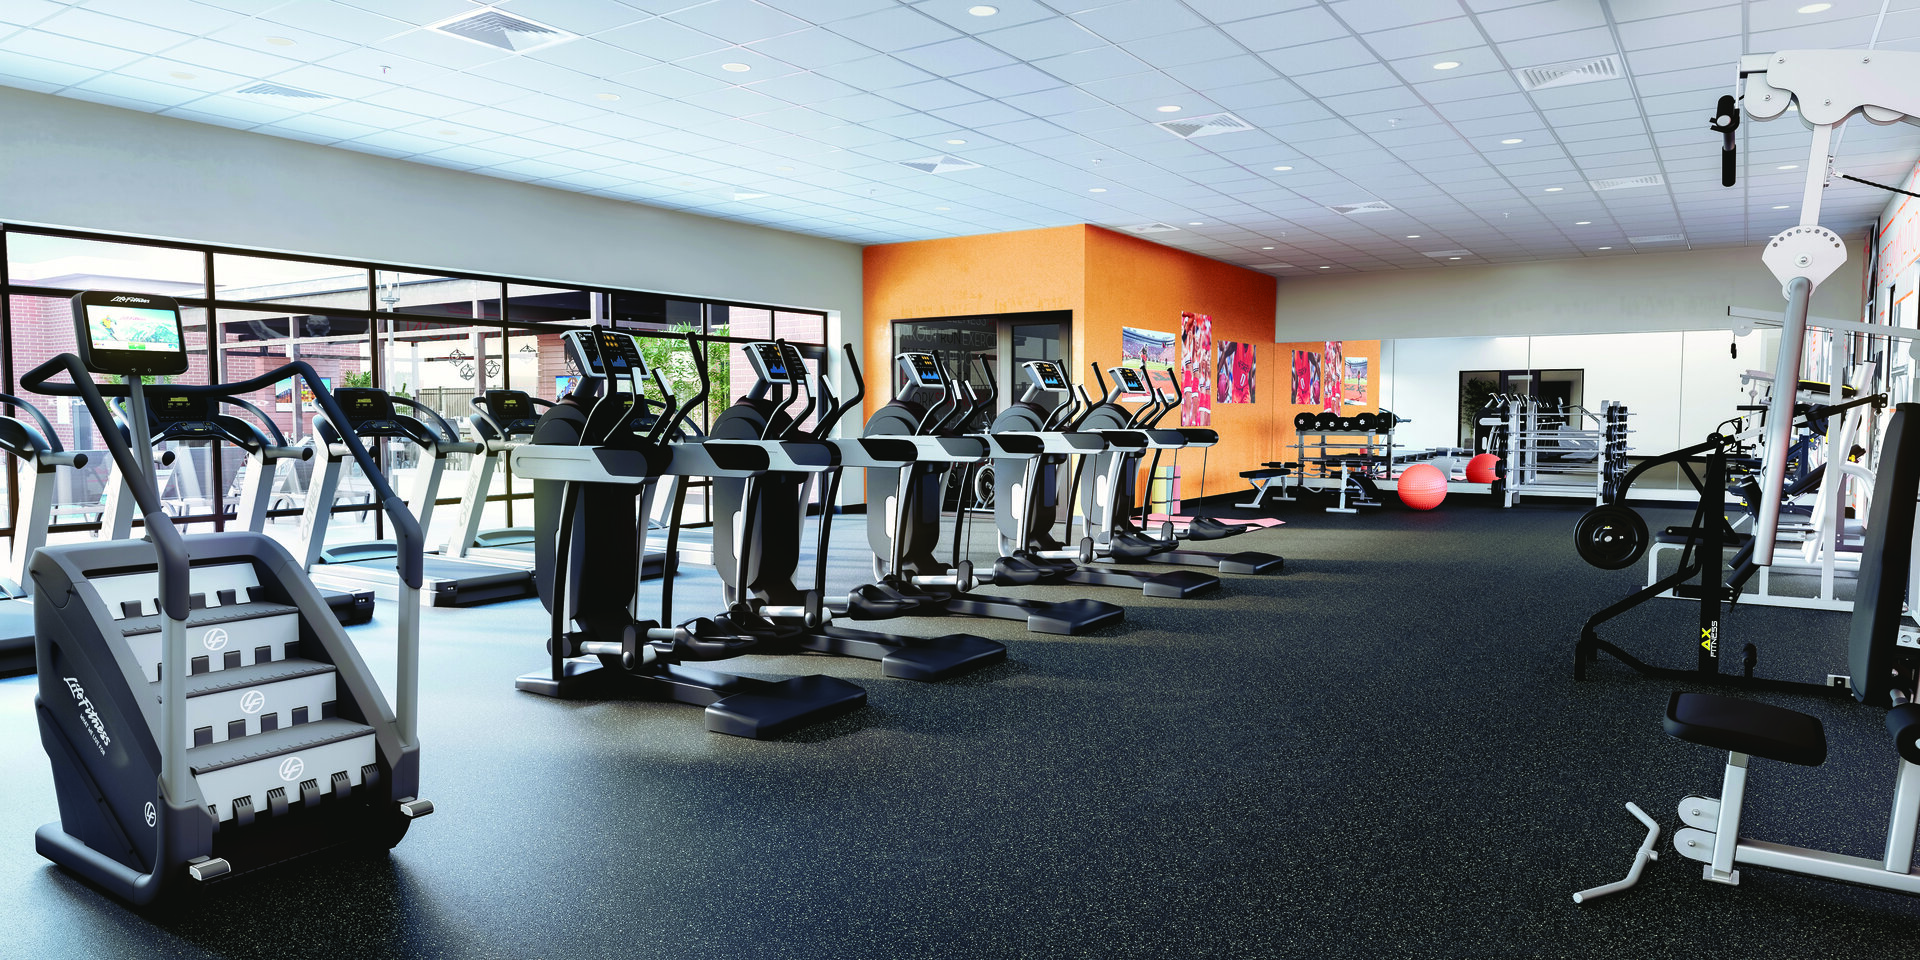 A well-equipped gym room with exercise equipment and mirrors in a student housing fitness center.